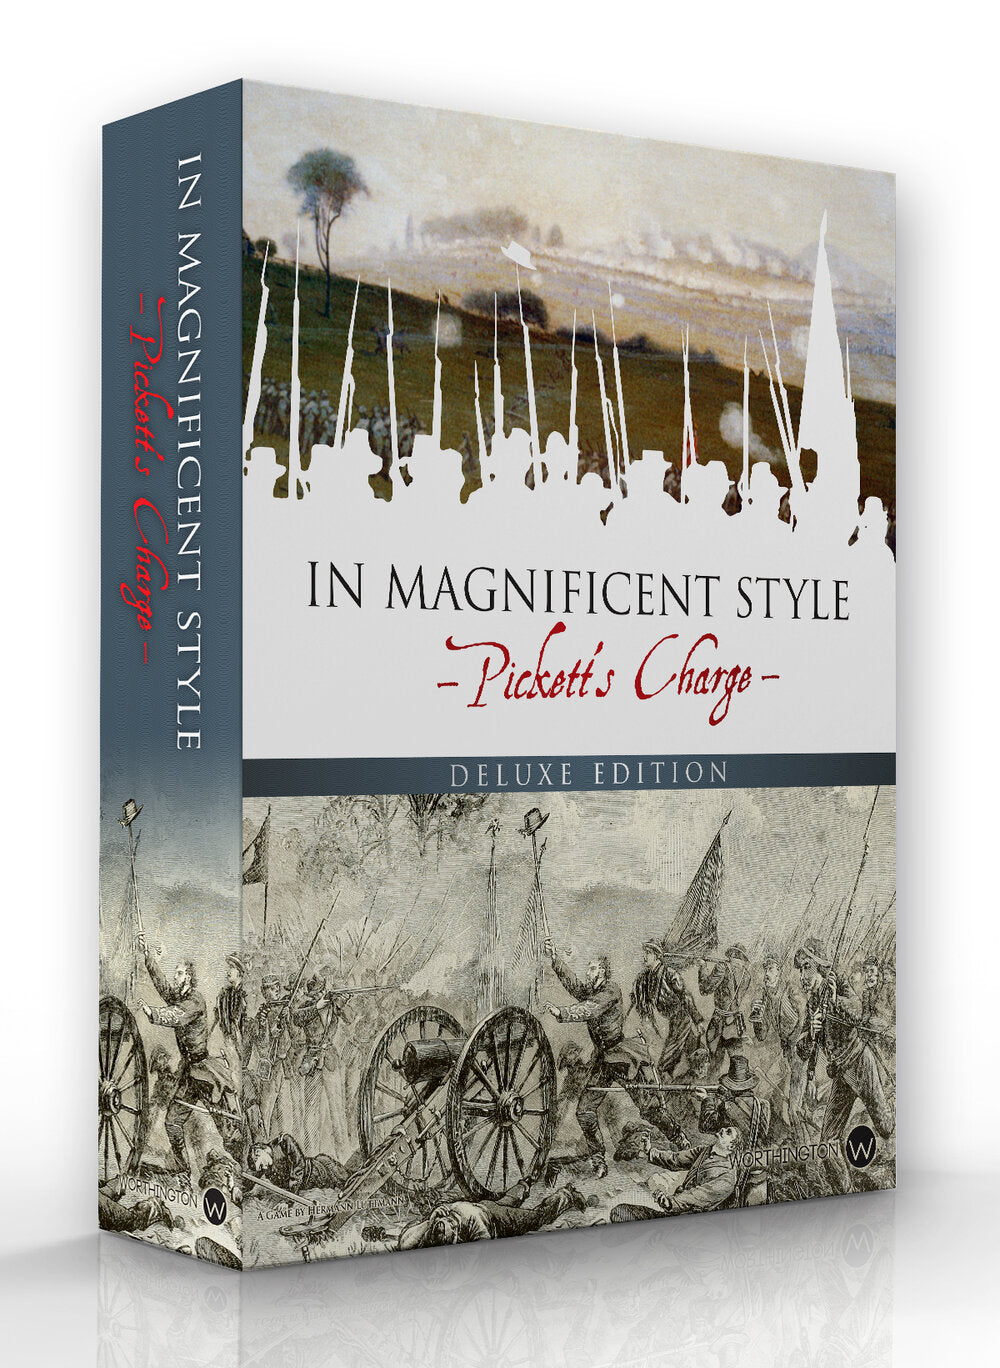 IN MAGNIFICENT STYLE PICKETT'S CHARGE